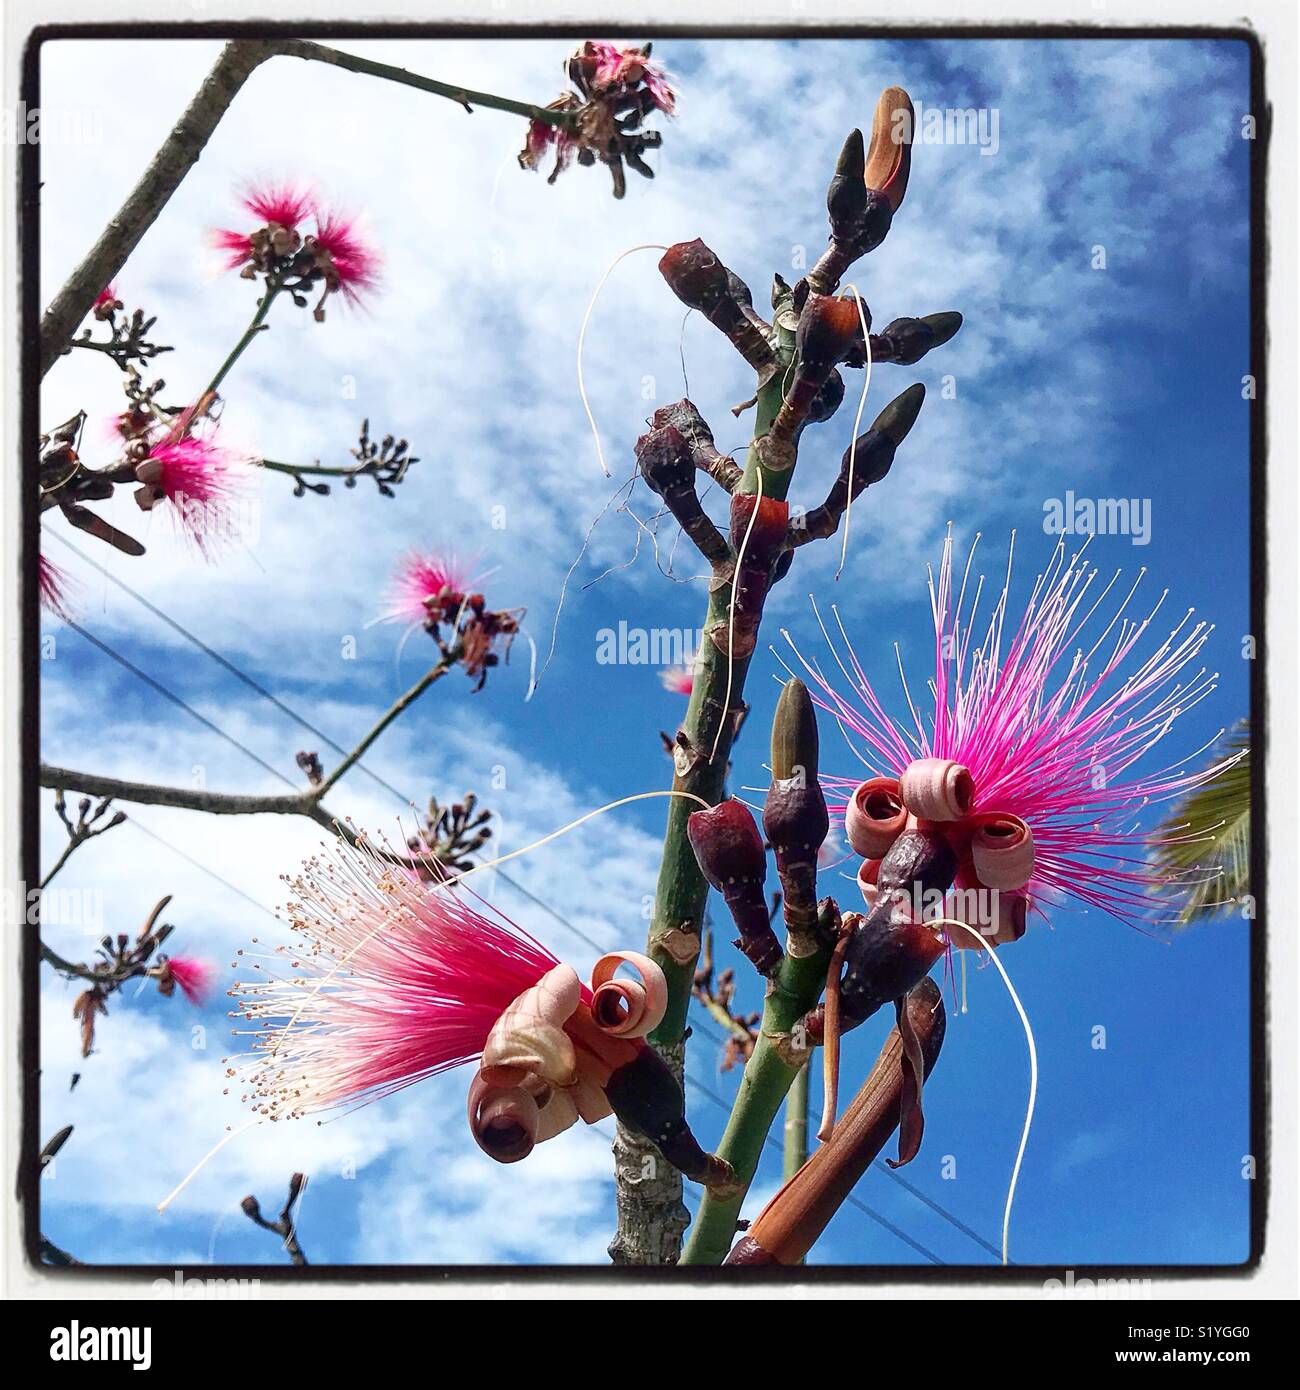 Beautiful pink flowers from the Pseudobombax ellipticum, aka the shaving brush tree, bloom overhead announcing the arrival of spring in Ajijic, Mexico. Stock Photo